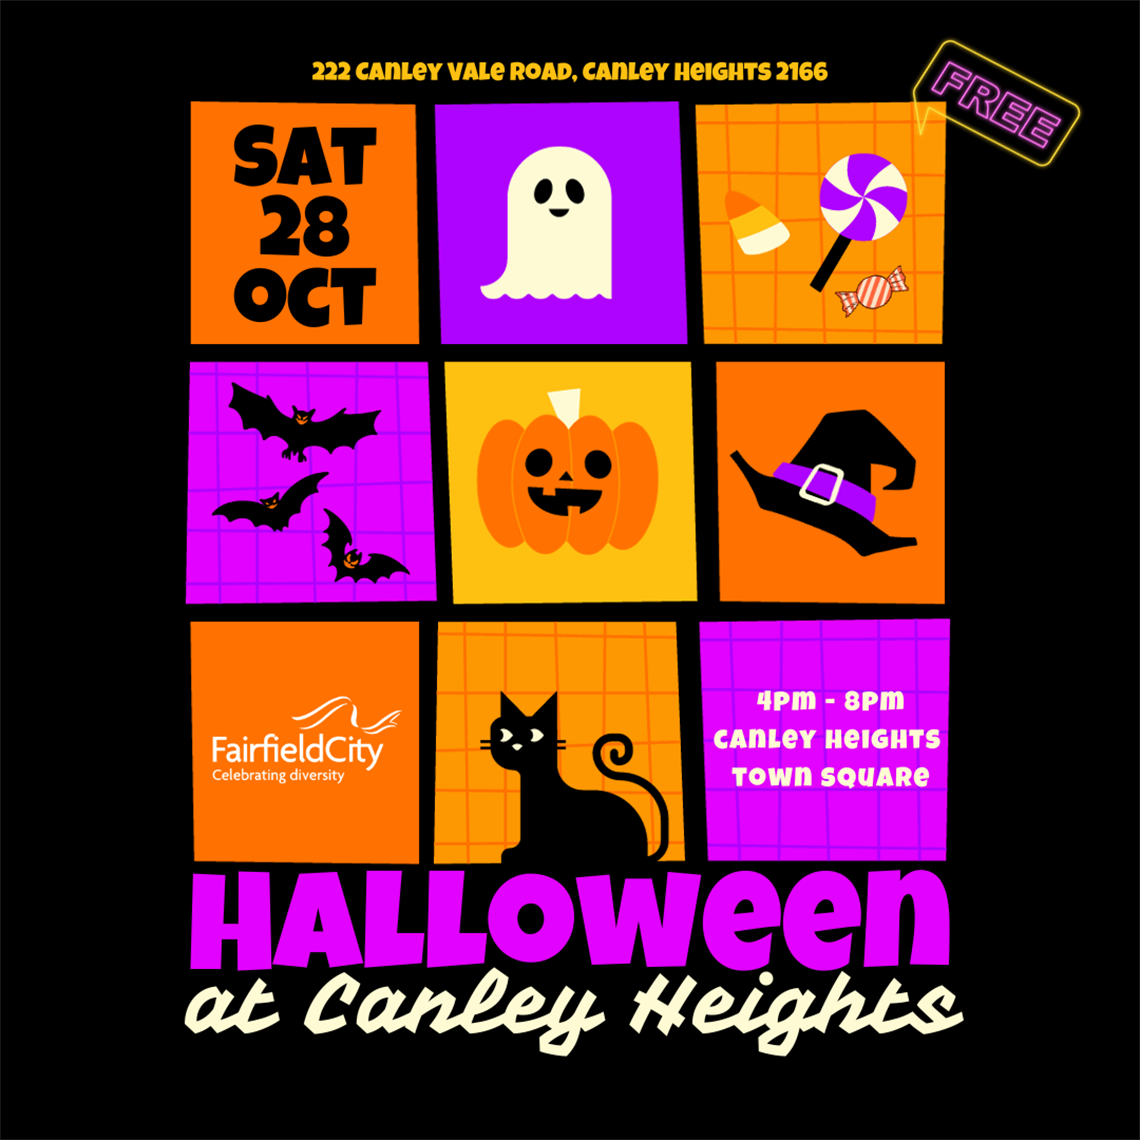 Halloween at Canley Heights, Free event on Saturday 28th October, 4pm-8pm at Canley Heights Town Square, 222 Canley Vale Road